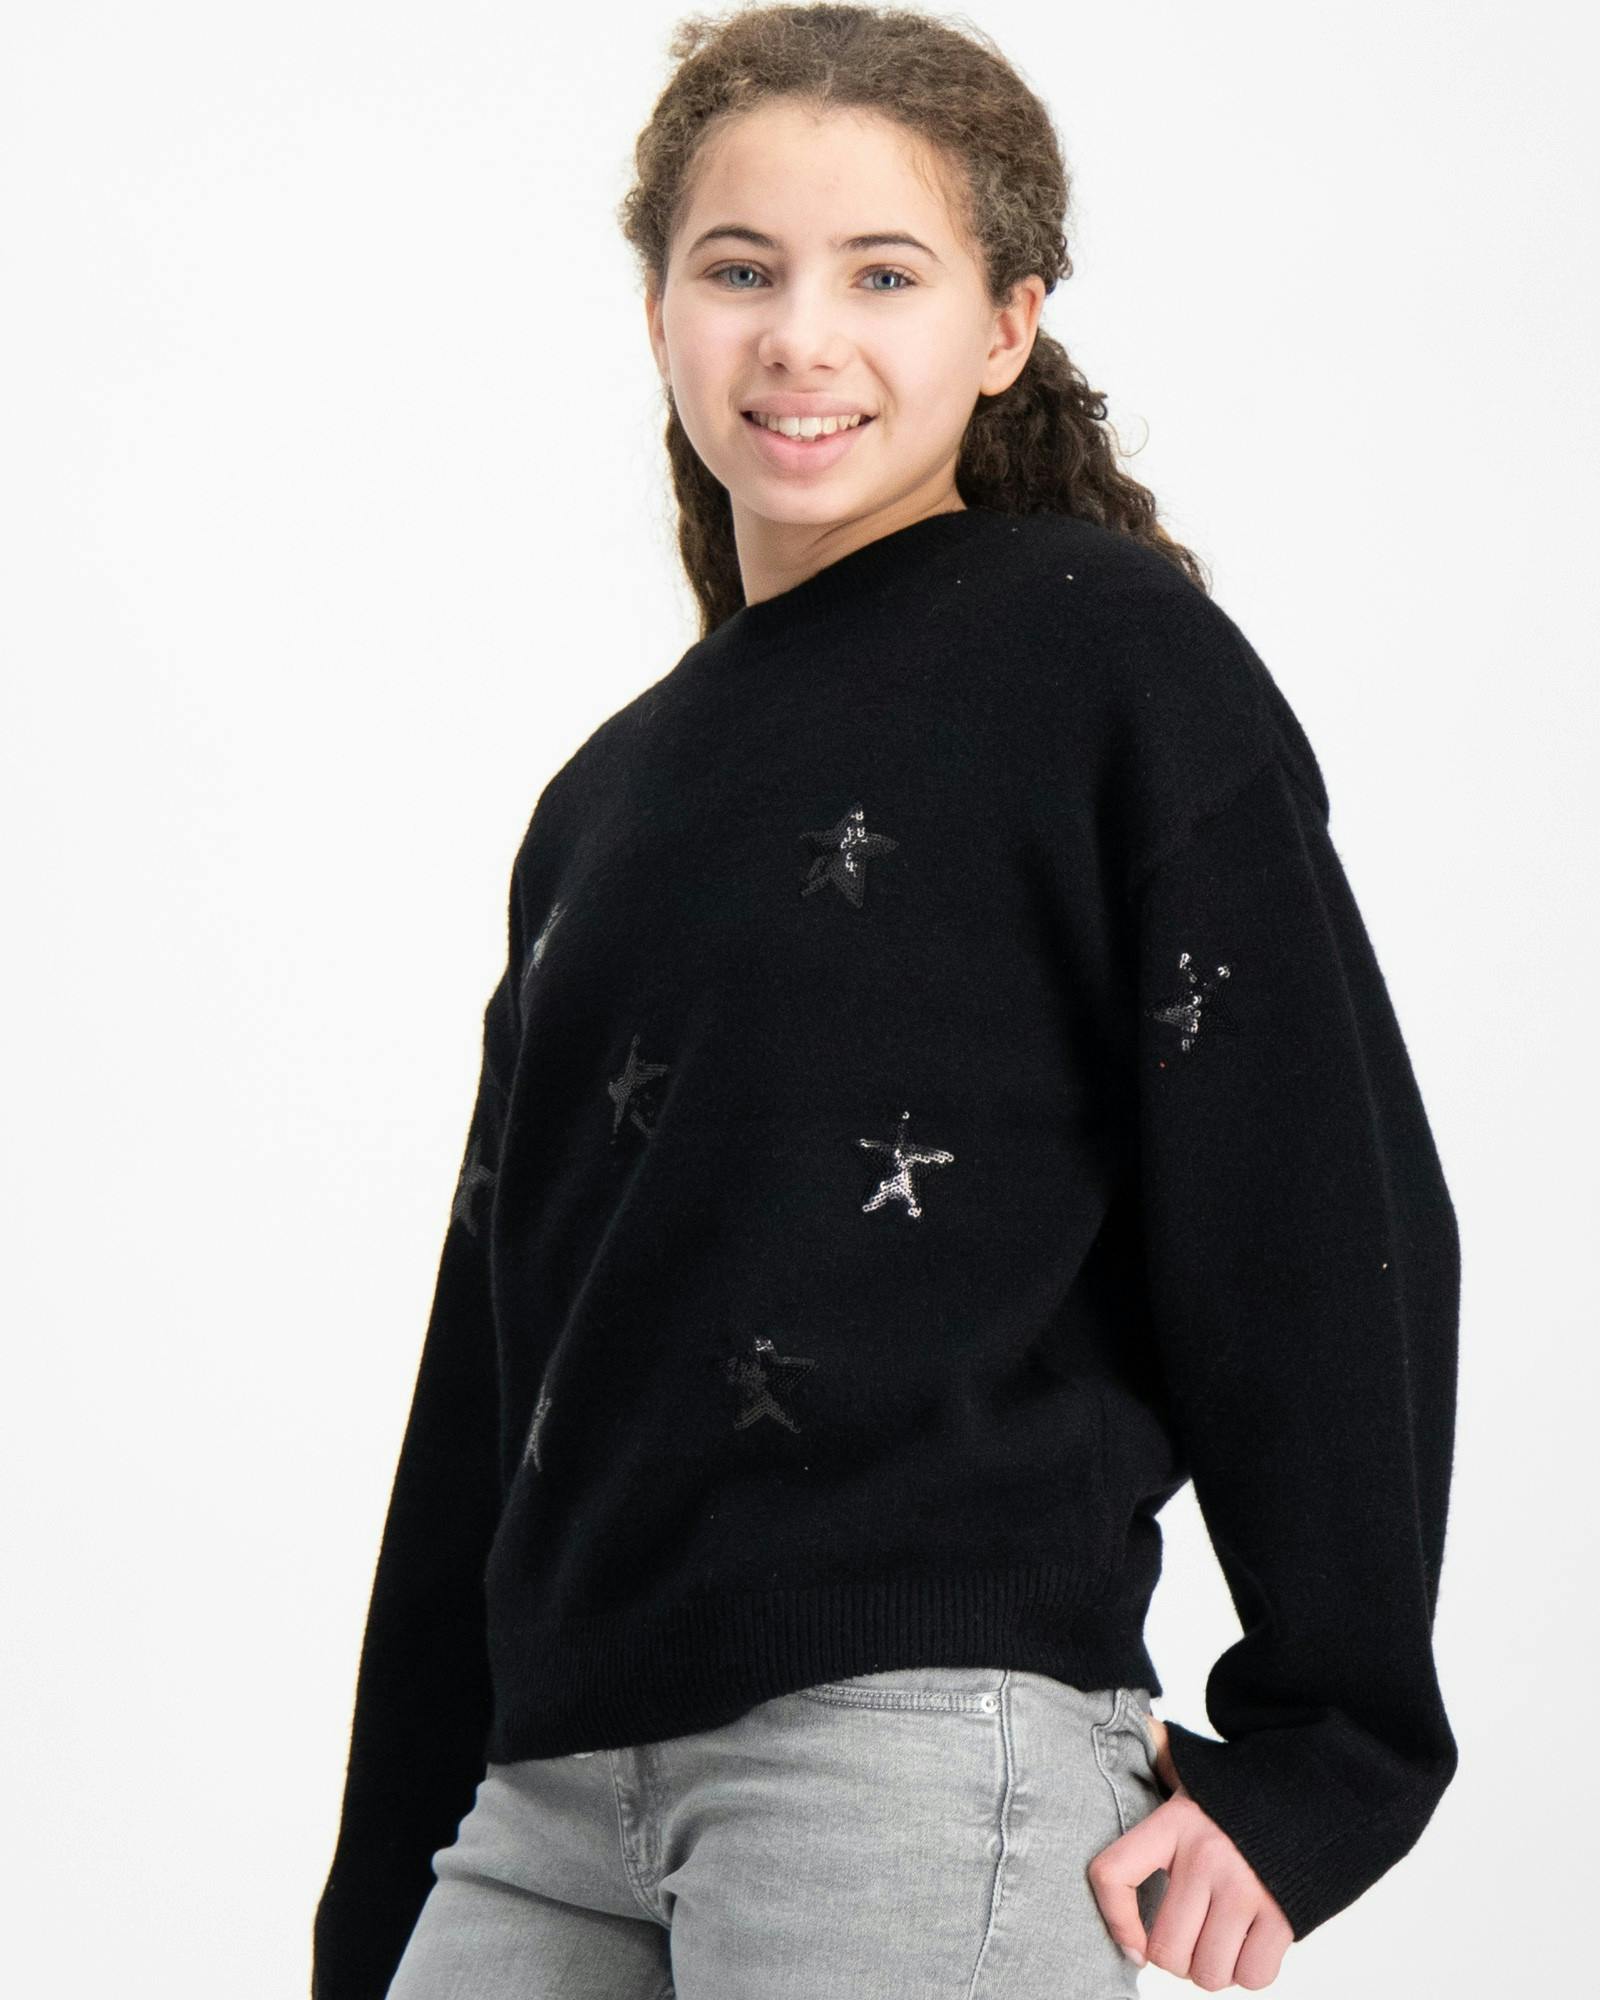 Y knitted star sweater